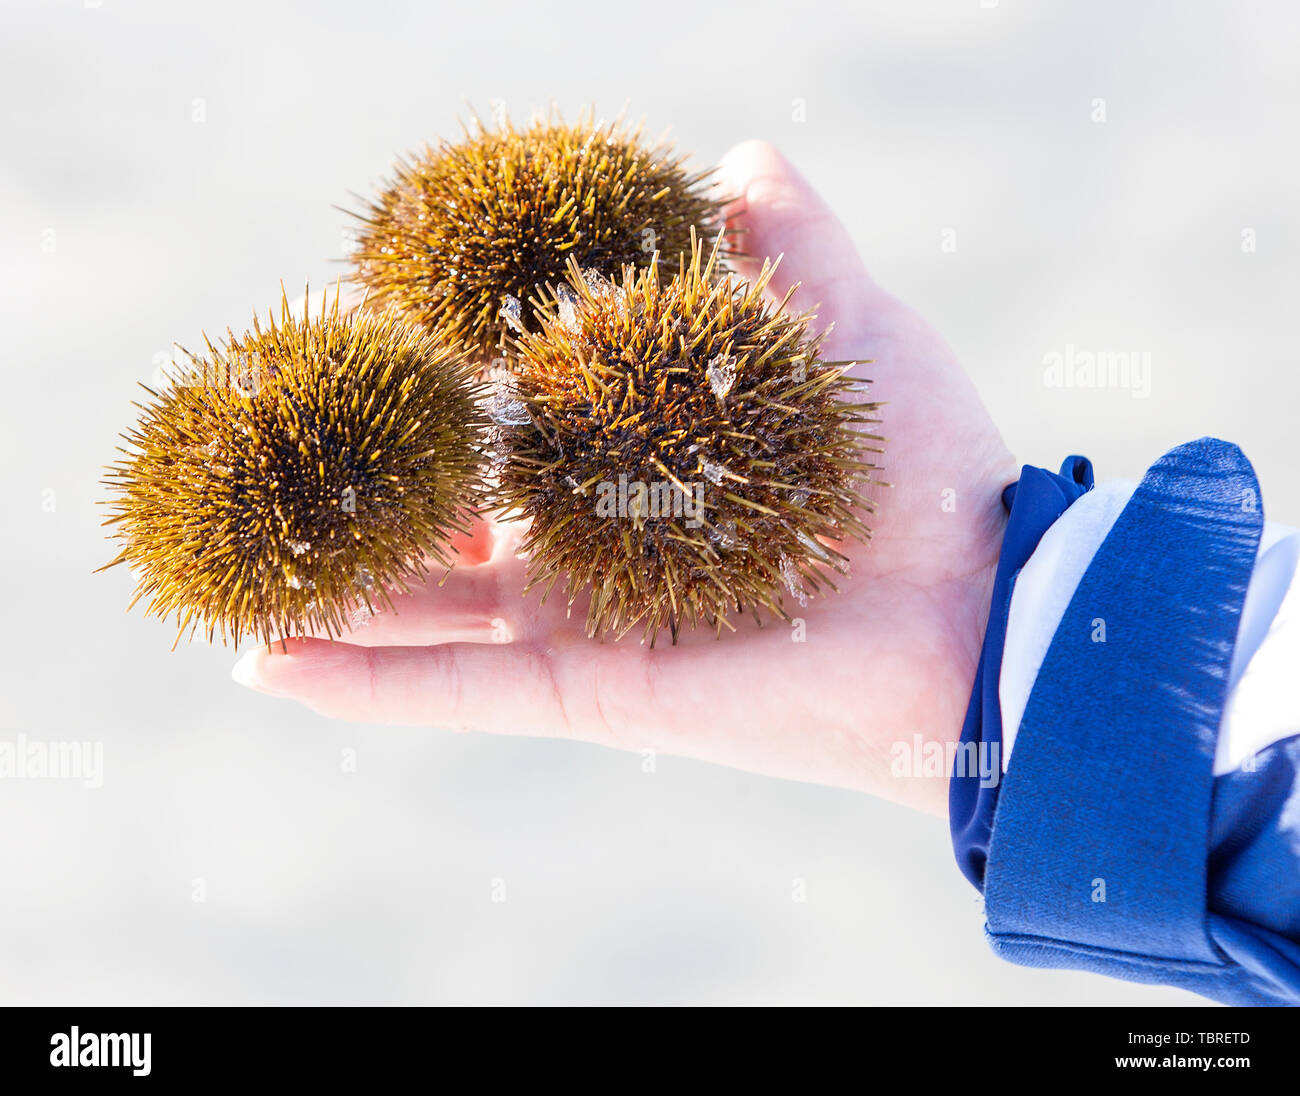 three sea urchins on hand in the winter Stock Photo